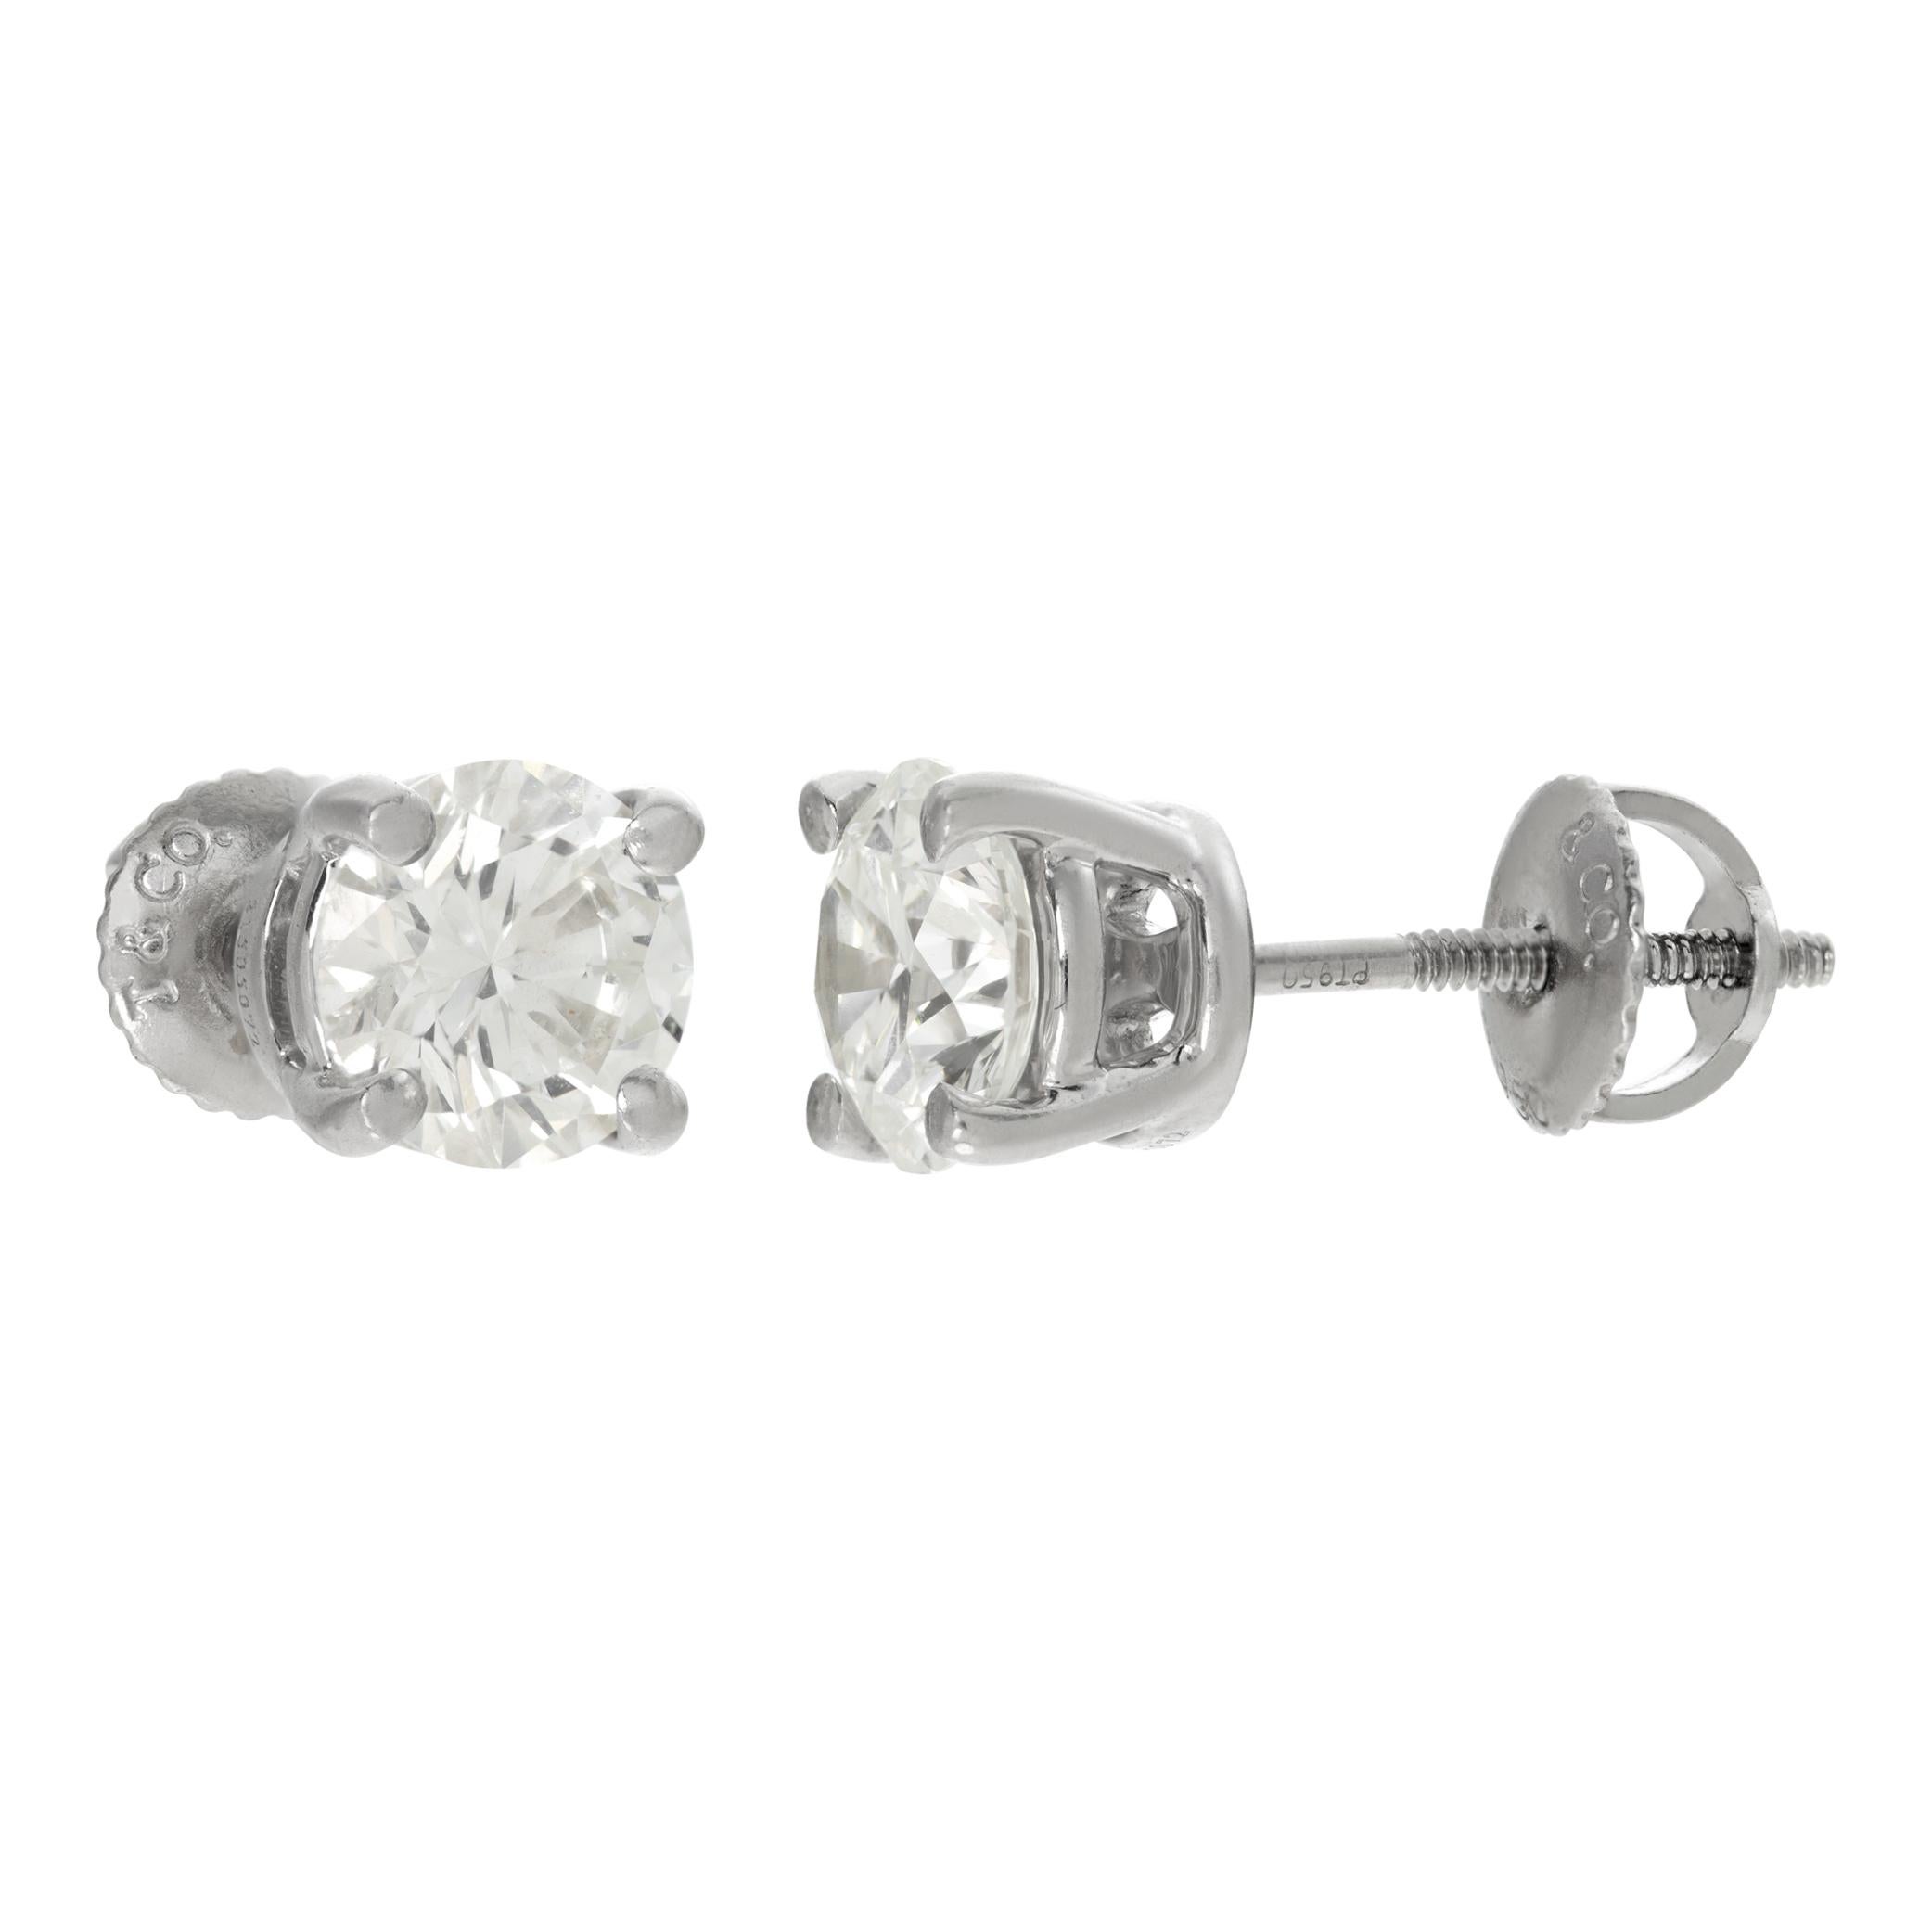 Tiffany & Co. Diamond stud earrings in platinum. 1.02 carats and 1.01 carats, G color, VS1 clarity. Comes in original Tiffany Box with Tiffany appraisal and diamond certificates.